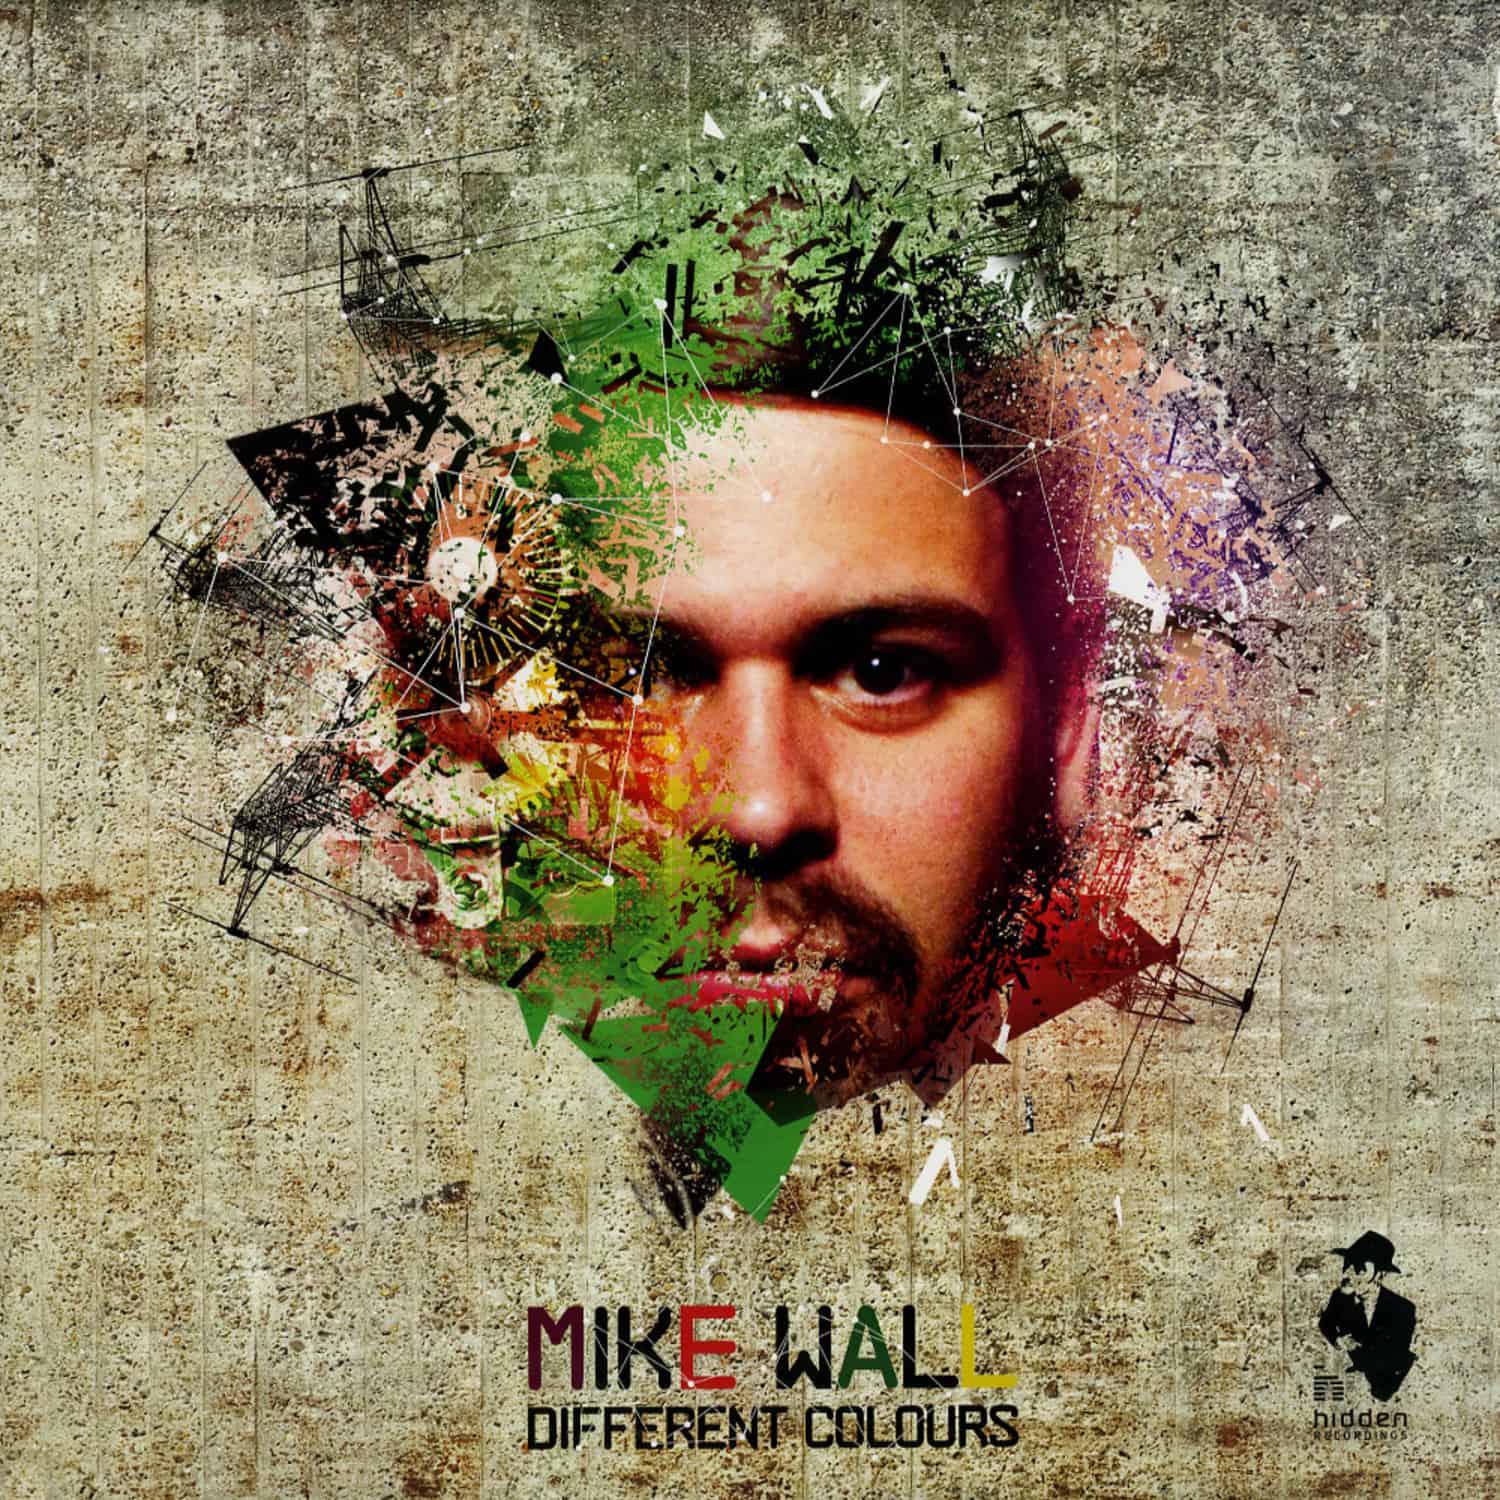 Mike Wall - DIFFERENT COLOURS 